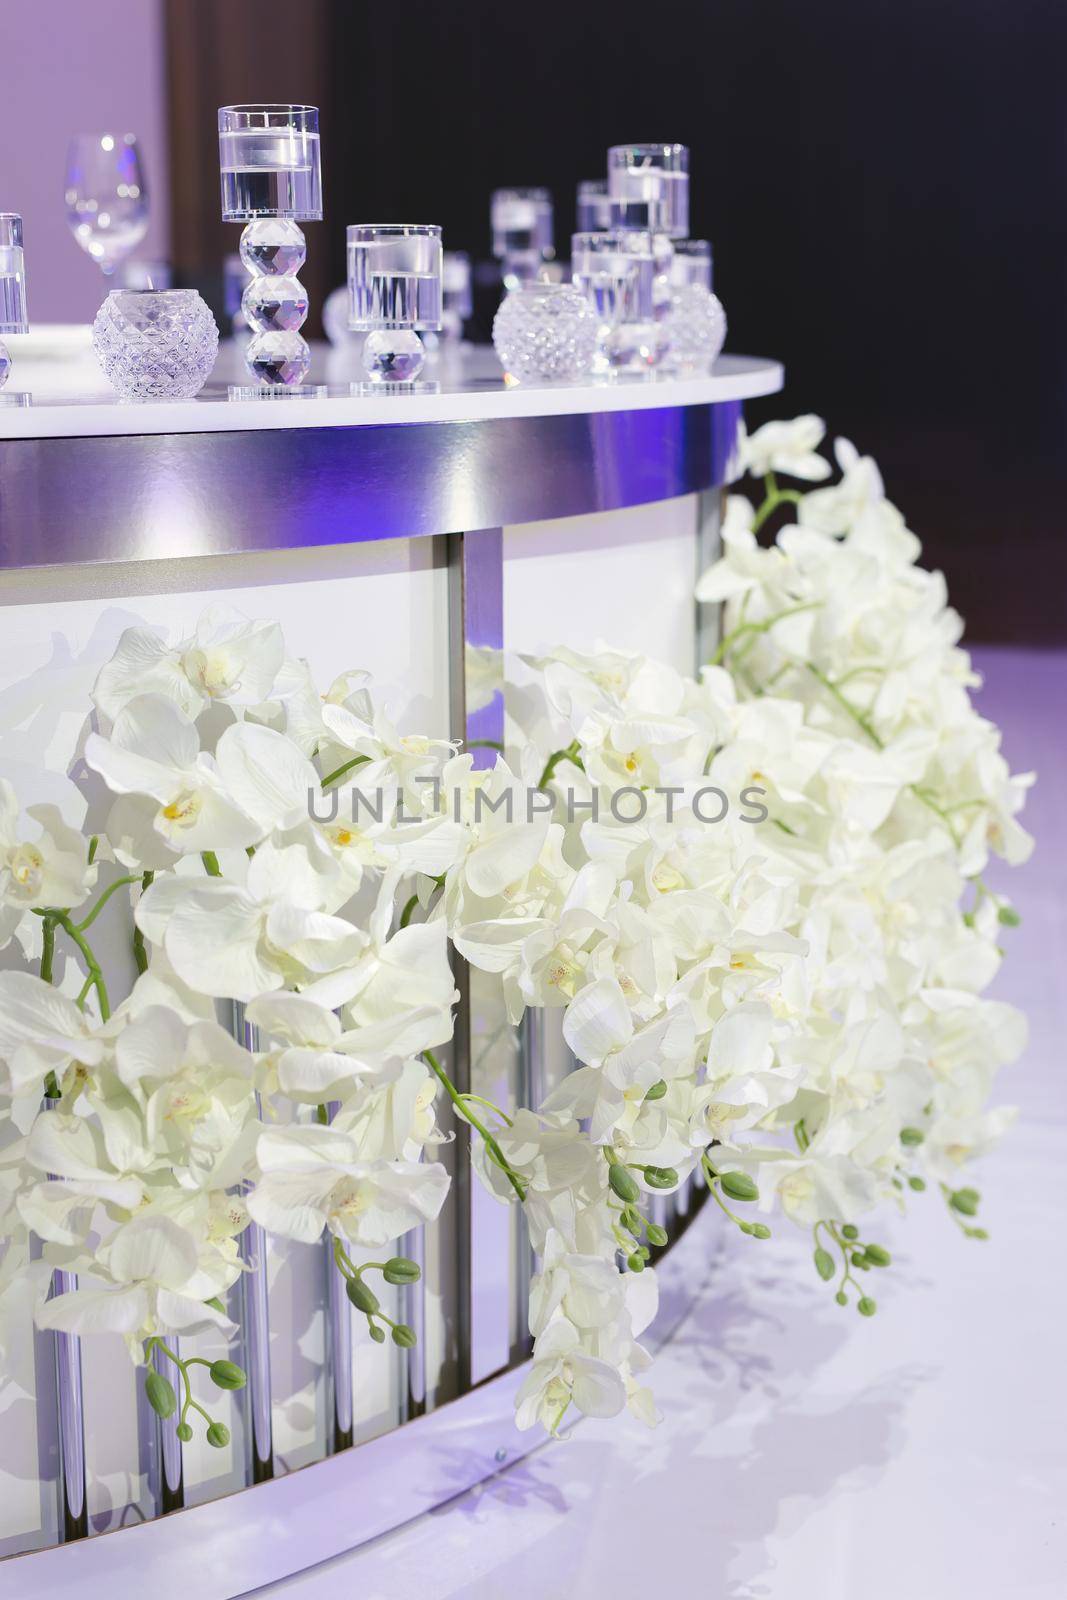 The table of the bride and groom at the wedding, decorated with orchids by StudioPeace